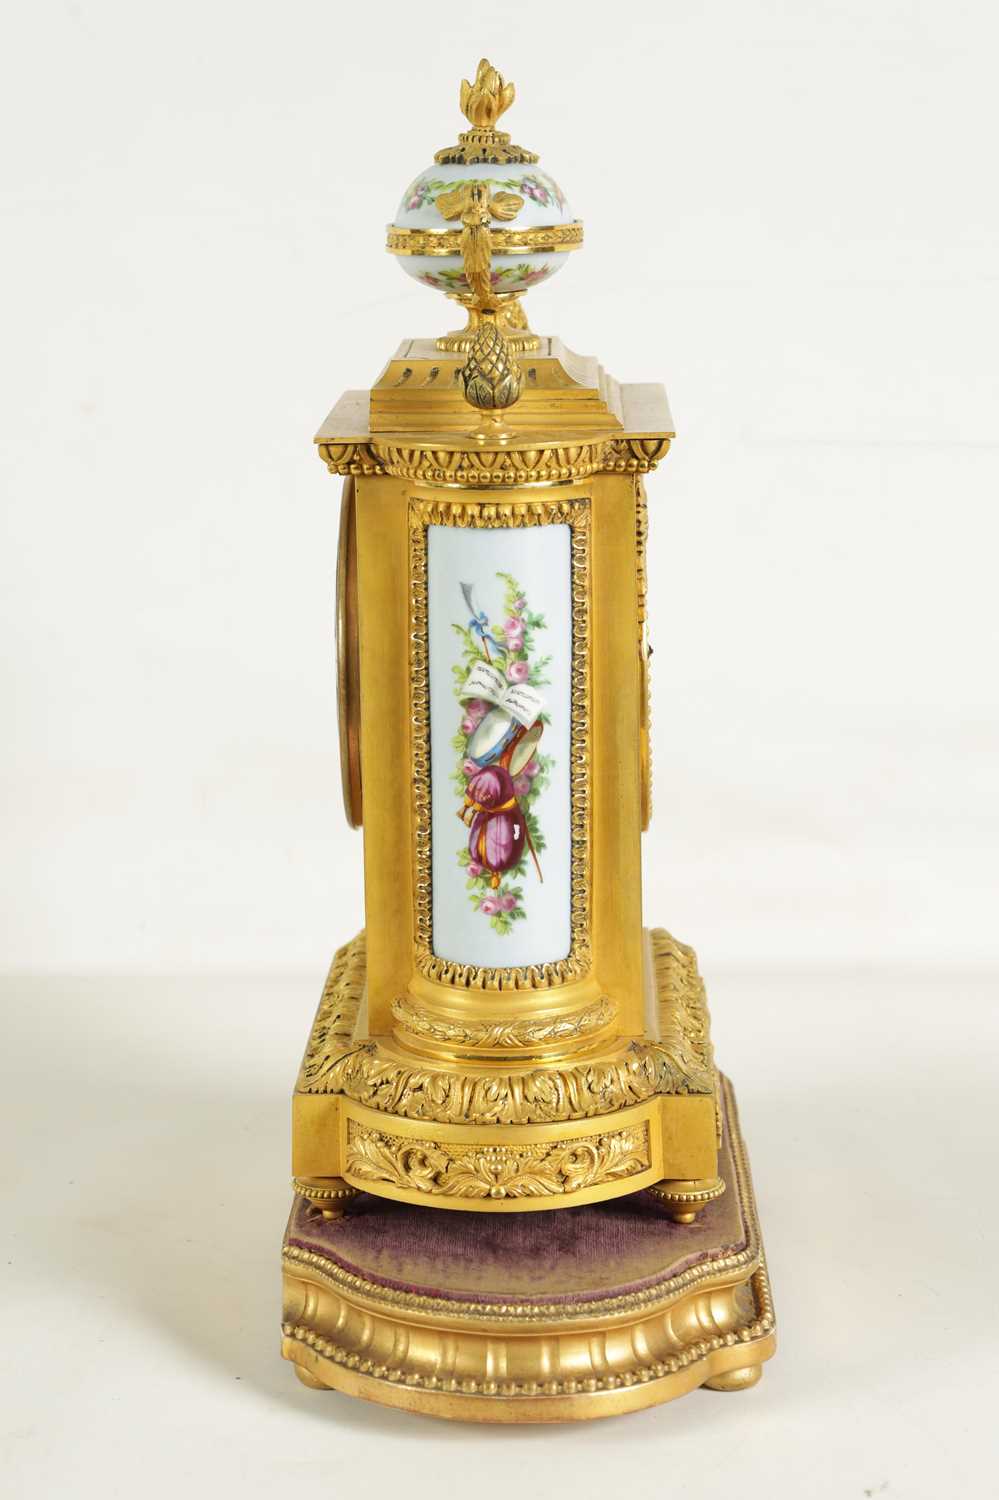 A GOOD QUALITY LATE 19TH CENTURY FRENCH ORMOLU AND PORCELAIN PANELLED MANTEL CLOCK - Image 7 of 11